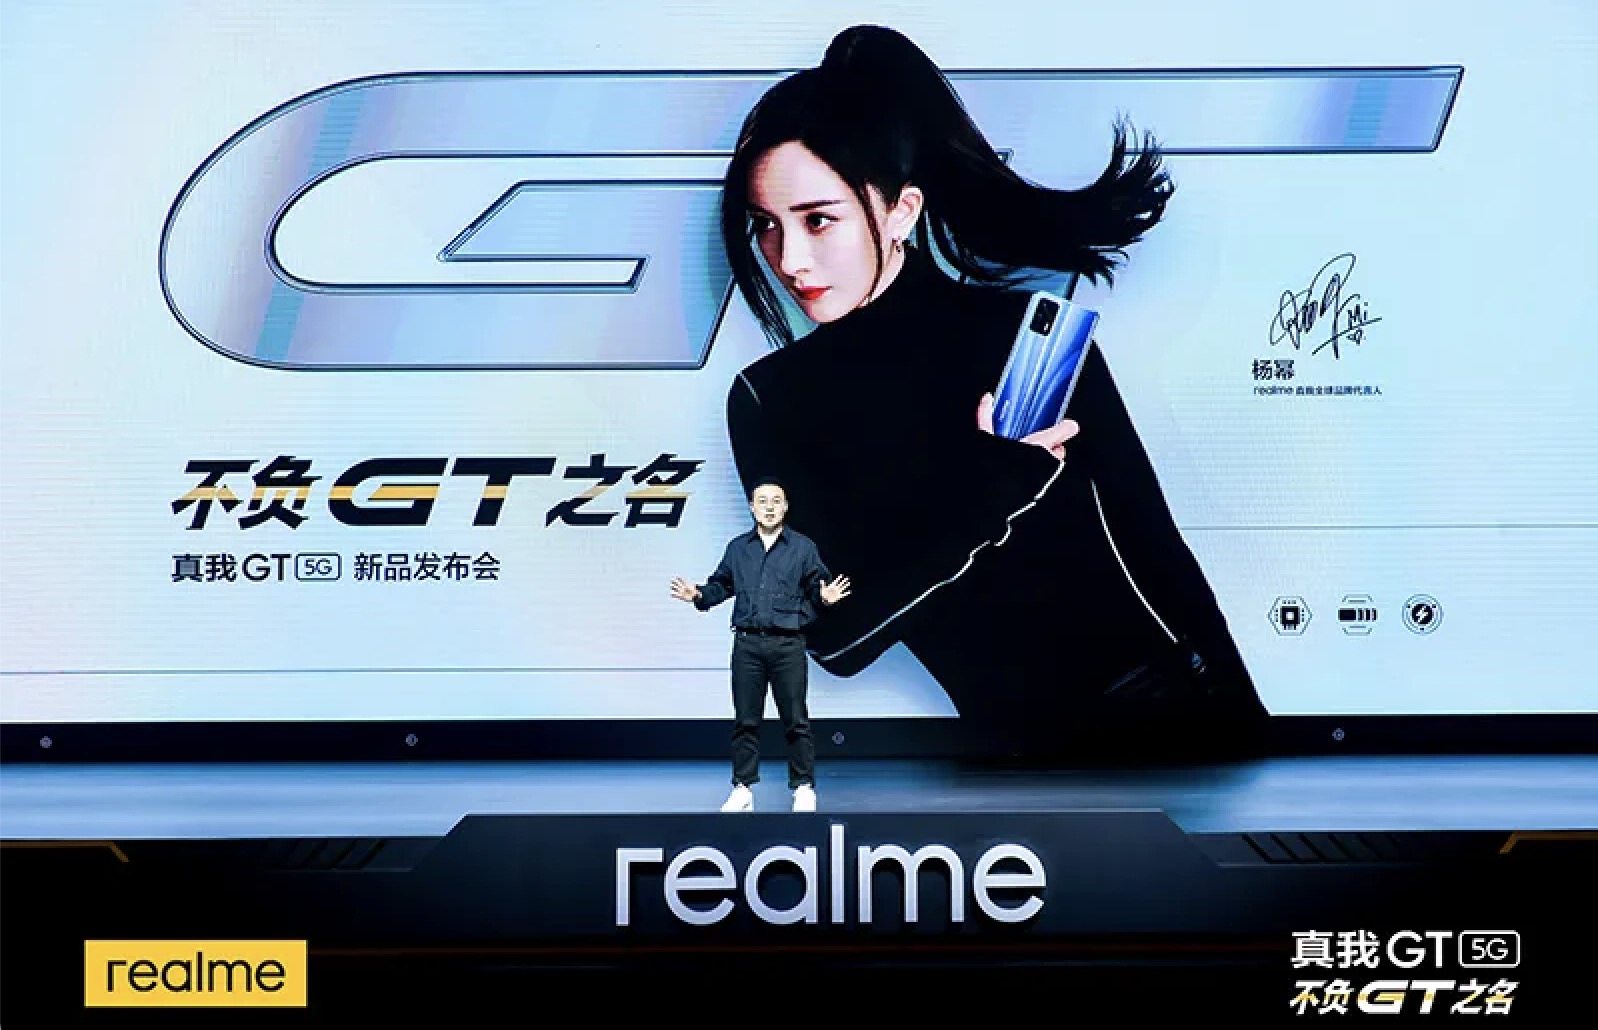 The new realme machine adopts a dual-chip platform to reduce the pressure of chip stocking